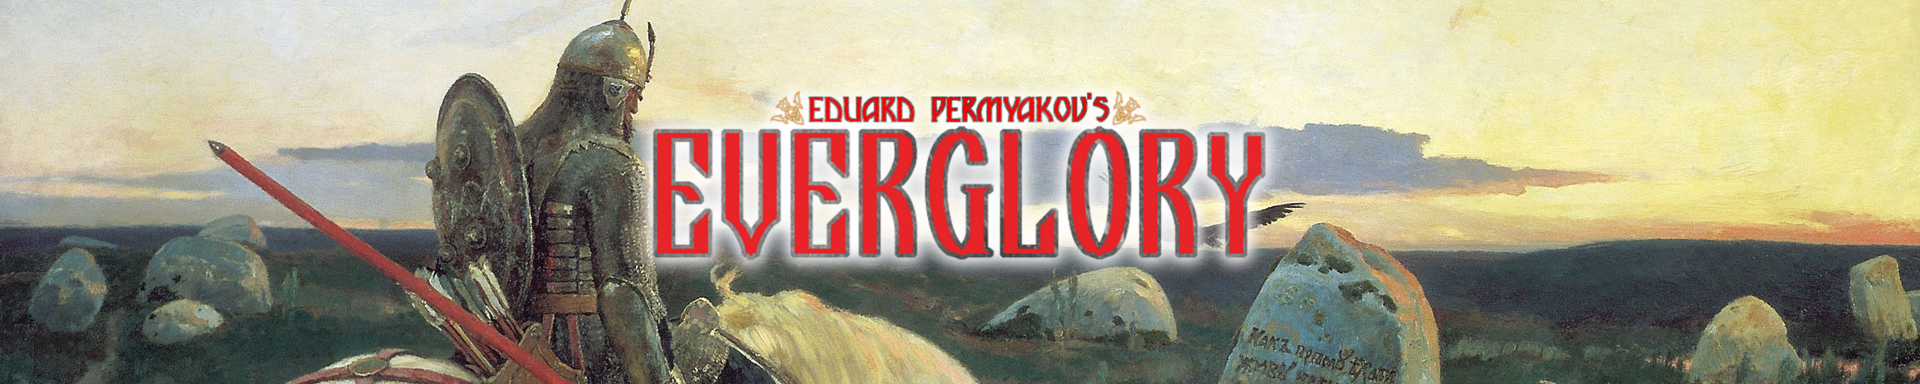 everglory-banner.png